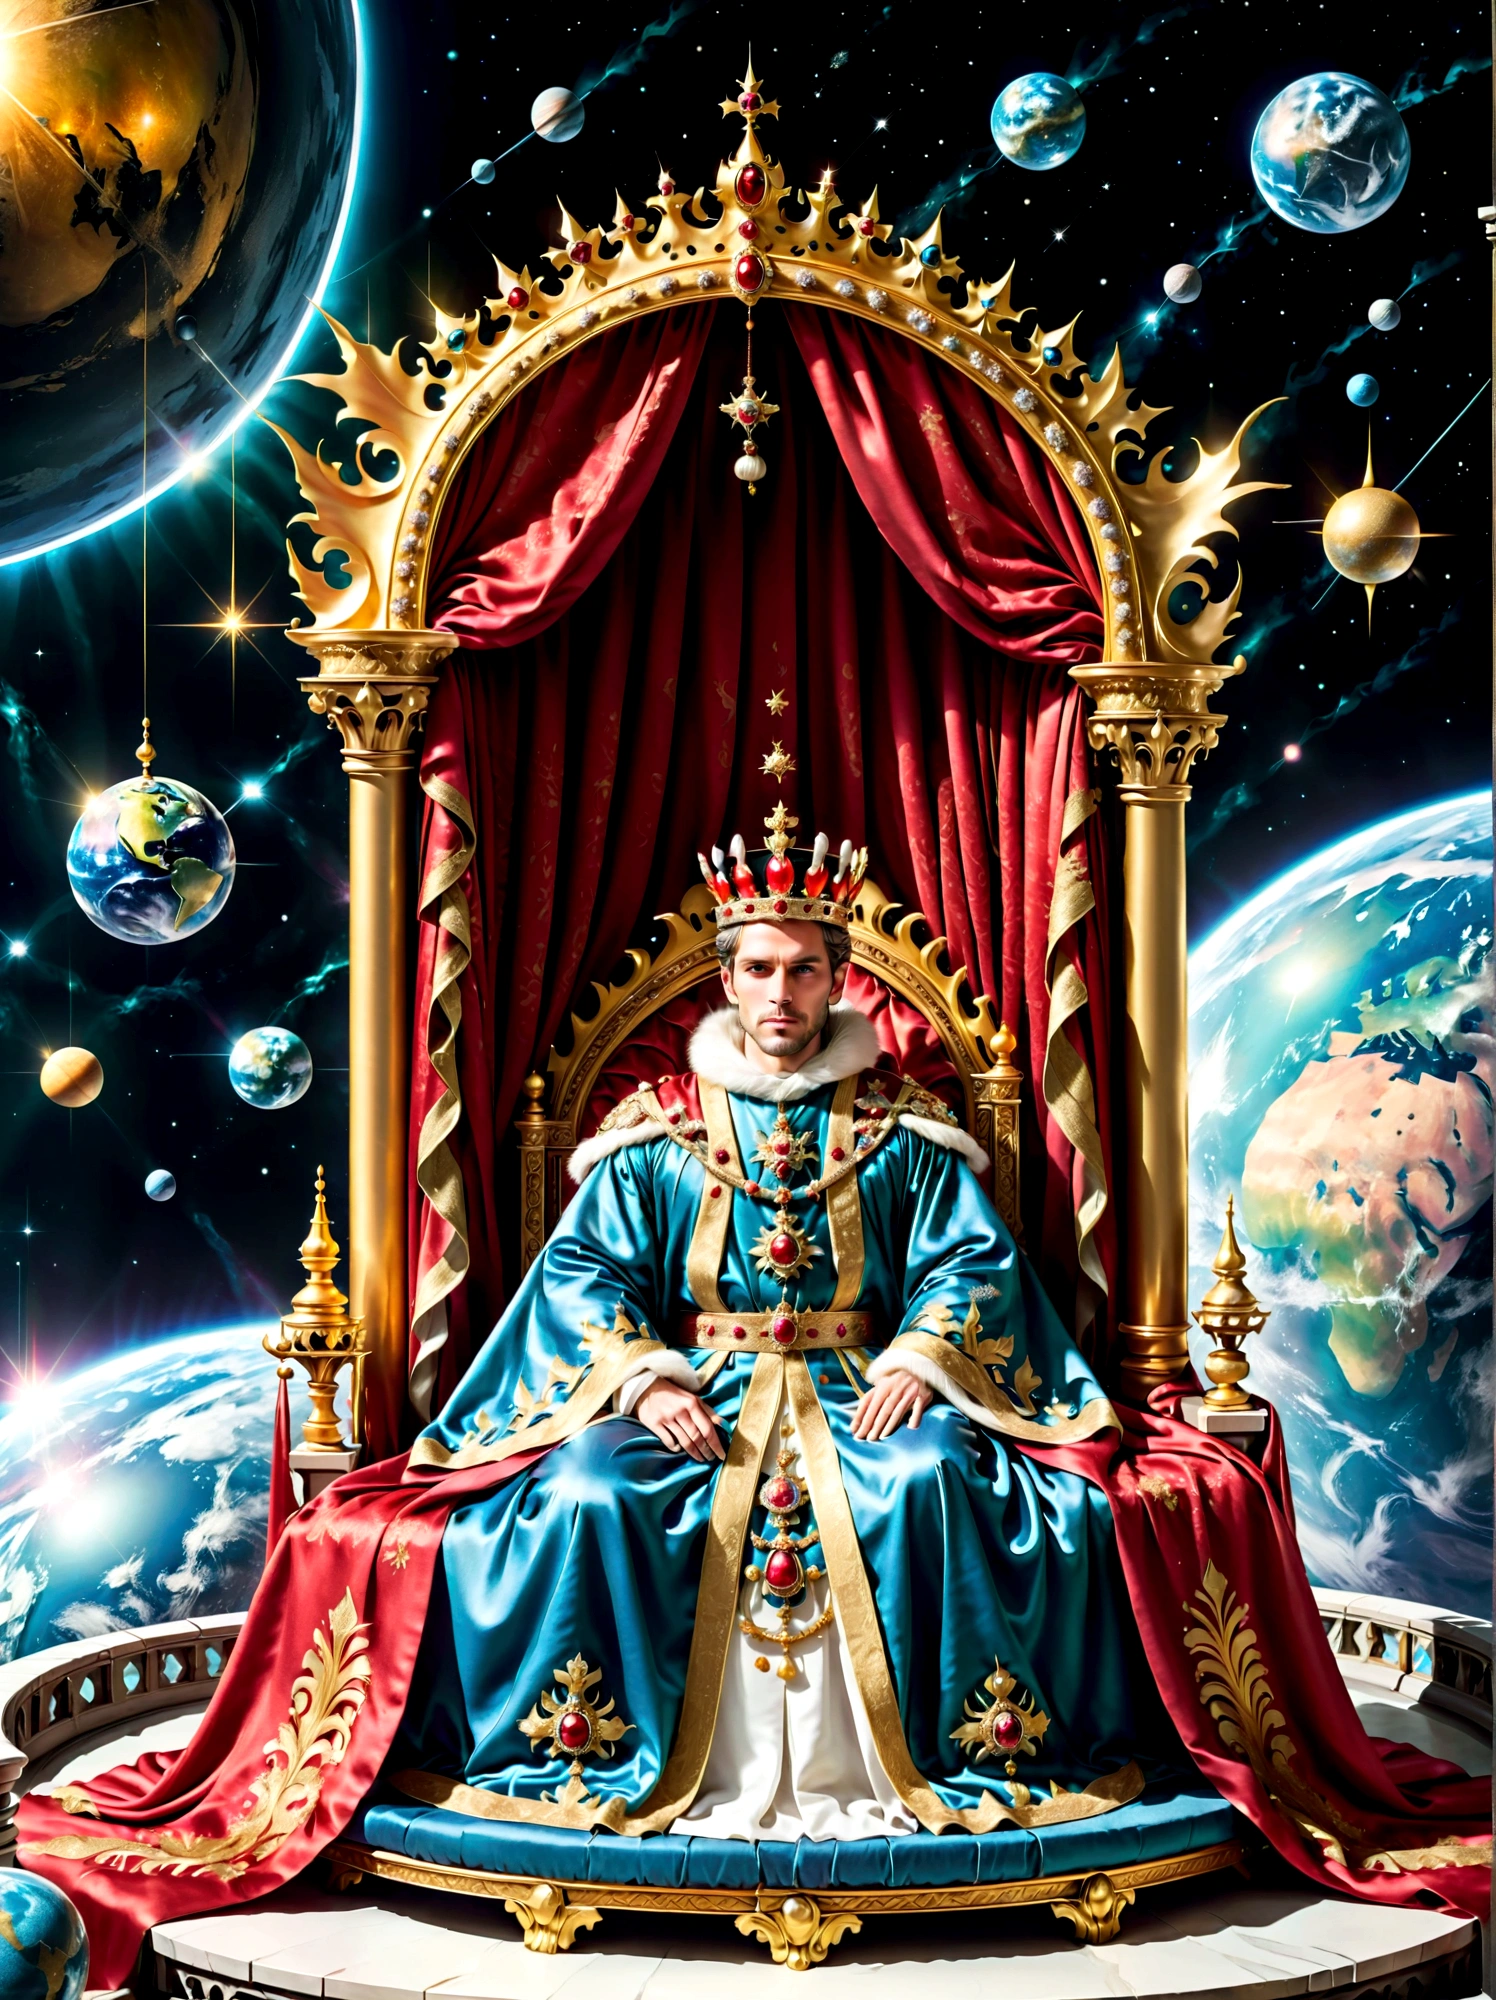 A royal figure in a lavish robe, adorned with a large crown, is seated on a throne. The setting is otherworldly and surreal, located in the vast expanse of space. The figure is perched on a miniature planet that's enveloped entirely by the rich fabric of the robe, reflecting an element of royal extravagance